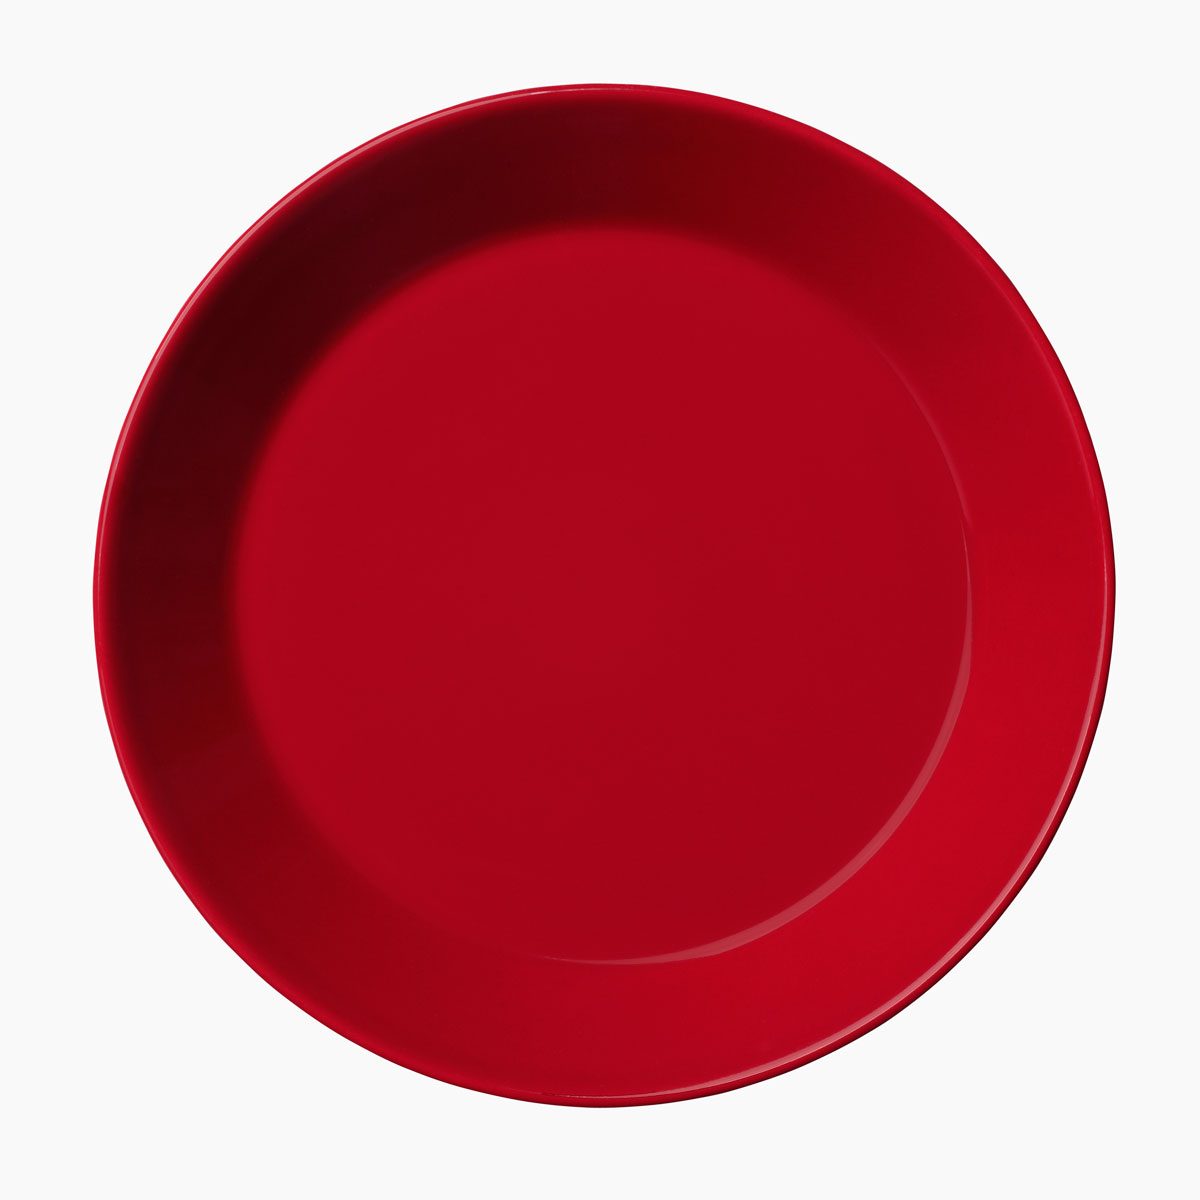 Iittala Teema Bread and Butter Plate 6.75" Red